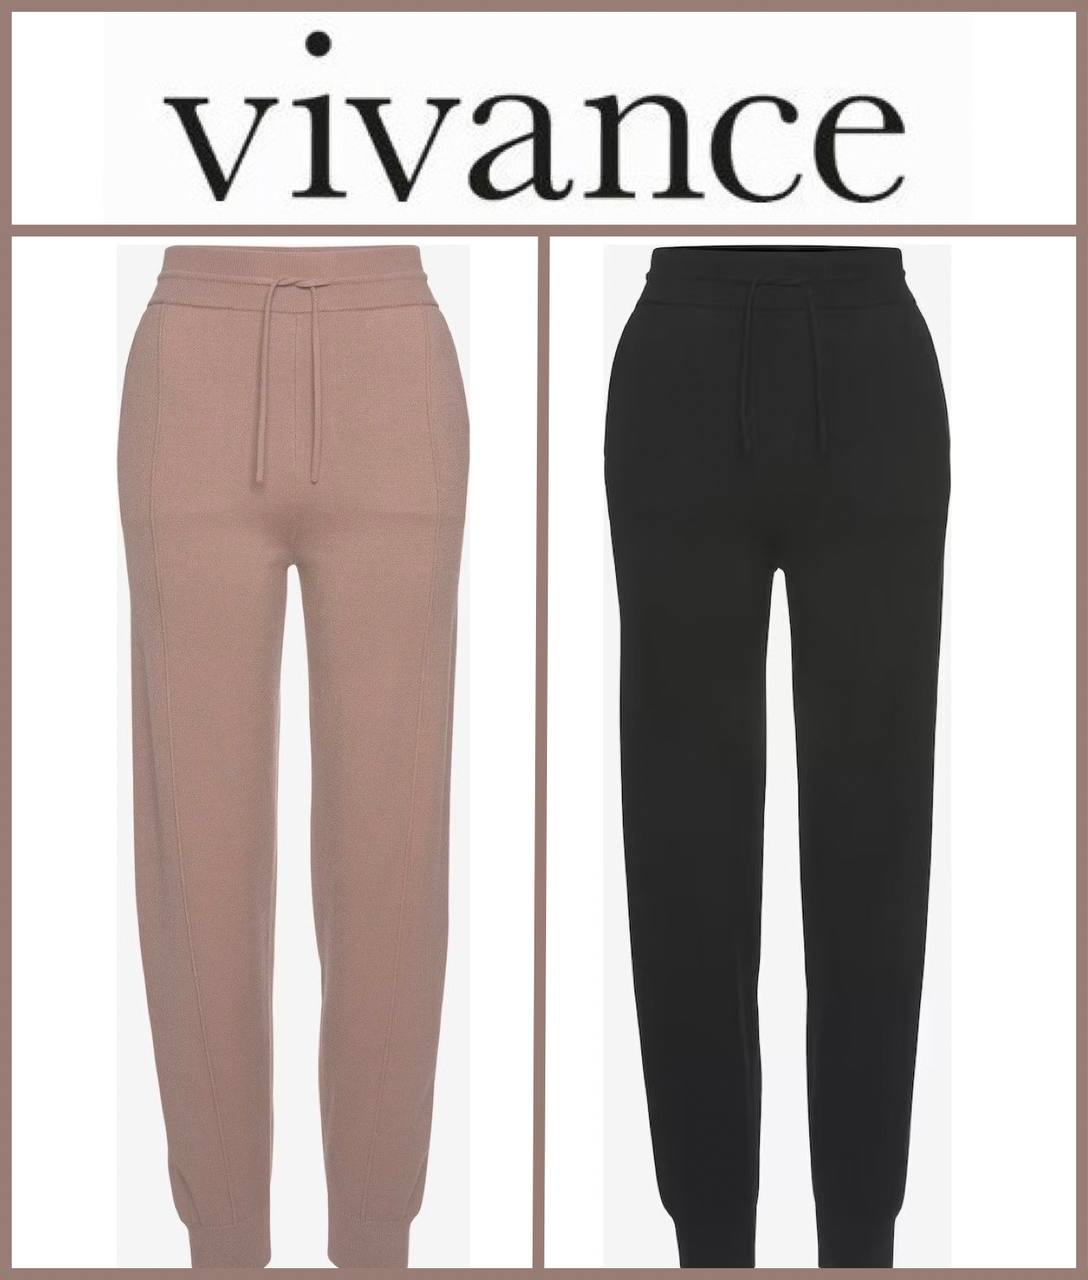 Women's knitted trousers from Vivance